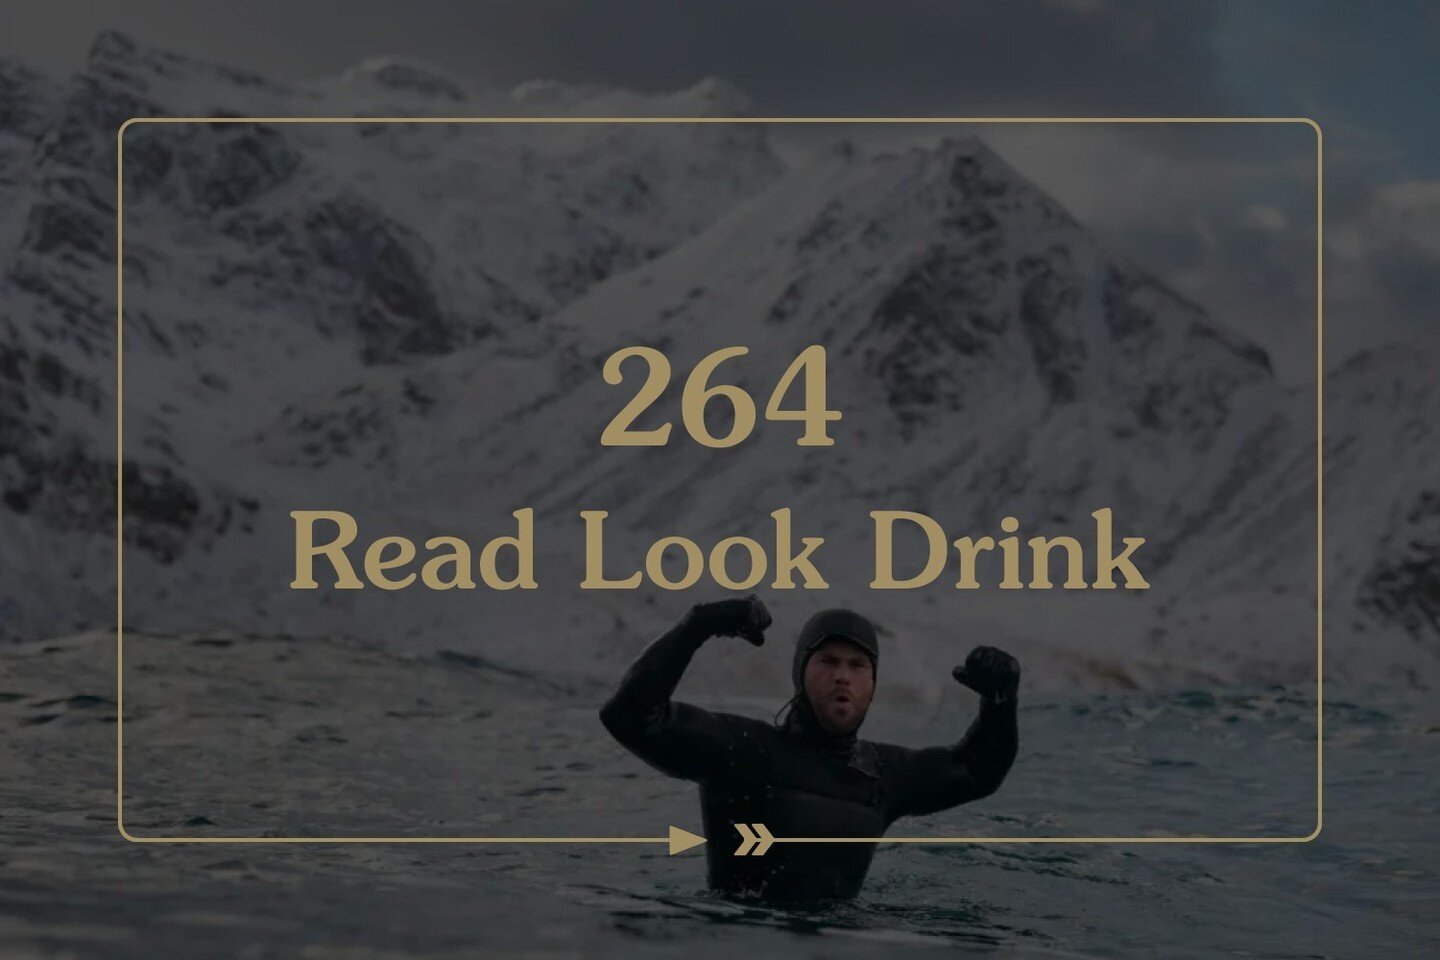 In his new Read Look Drink, @mpkiser shares his weekend cultural recommendations. Read @mike.maceacheran's story on rewilding the Scottish Highlands, watch @chrishemsworth's new show, &quot;Limitless&quot;, and try a beer by @dogfishhead that he desc